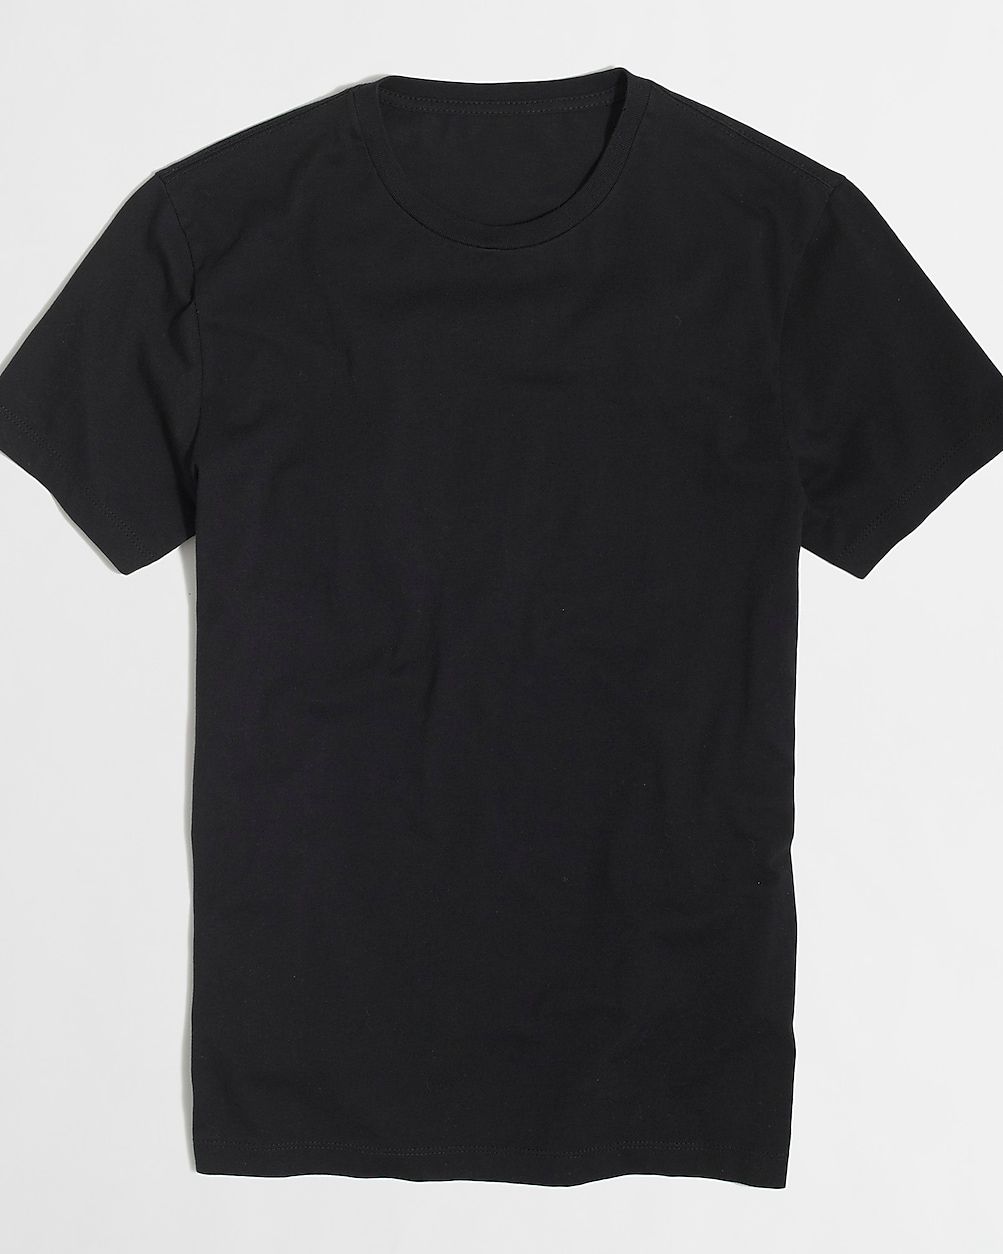 Washed jersey tee | J.Crew Factory